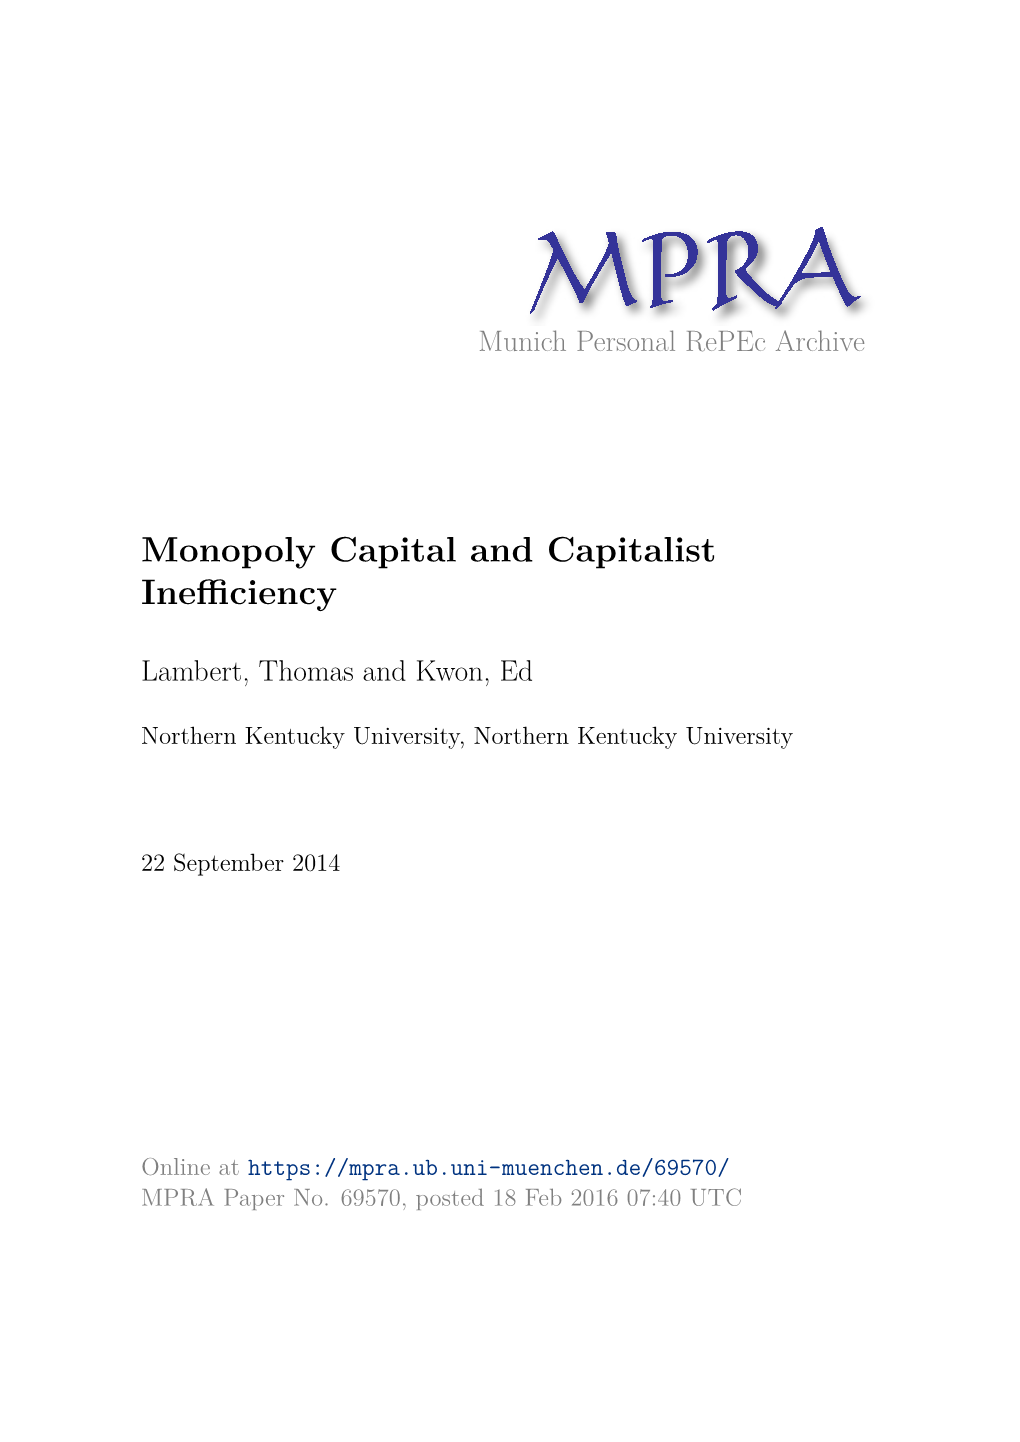 Monopoly Capital and Capitalist Inefficiency